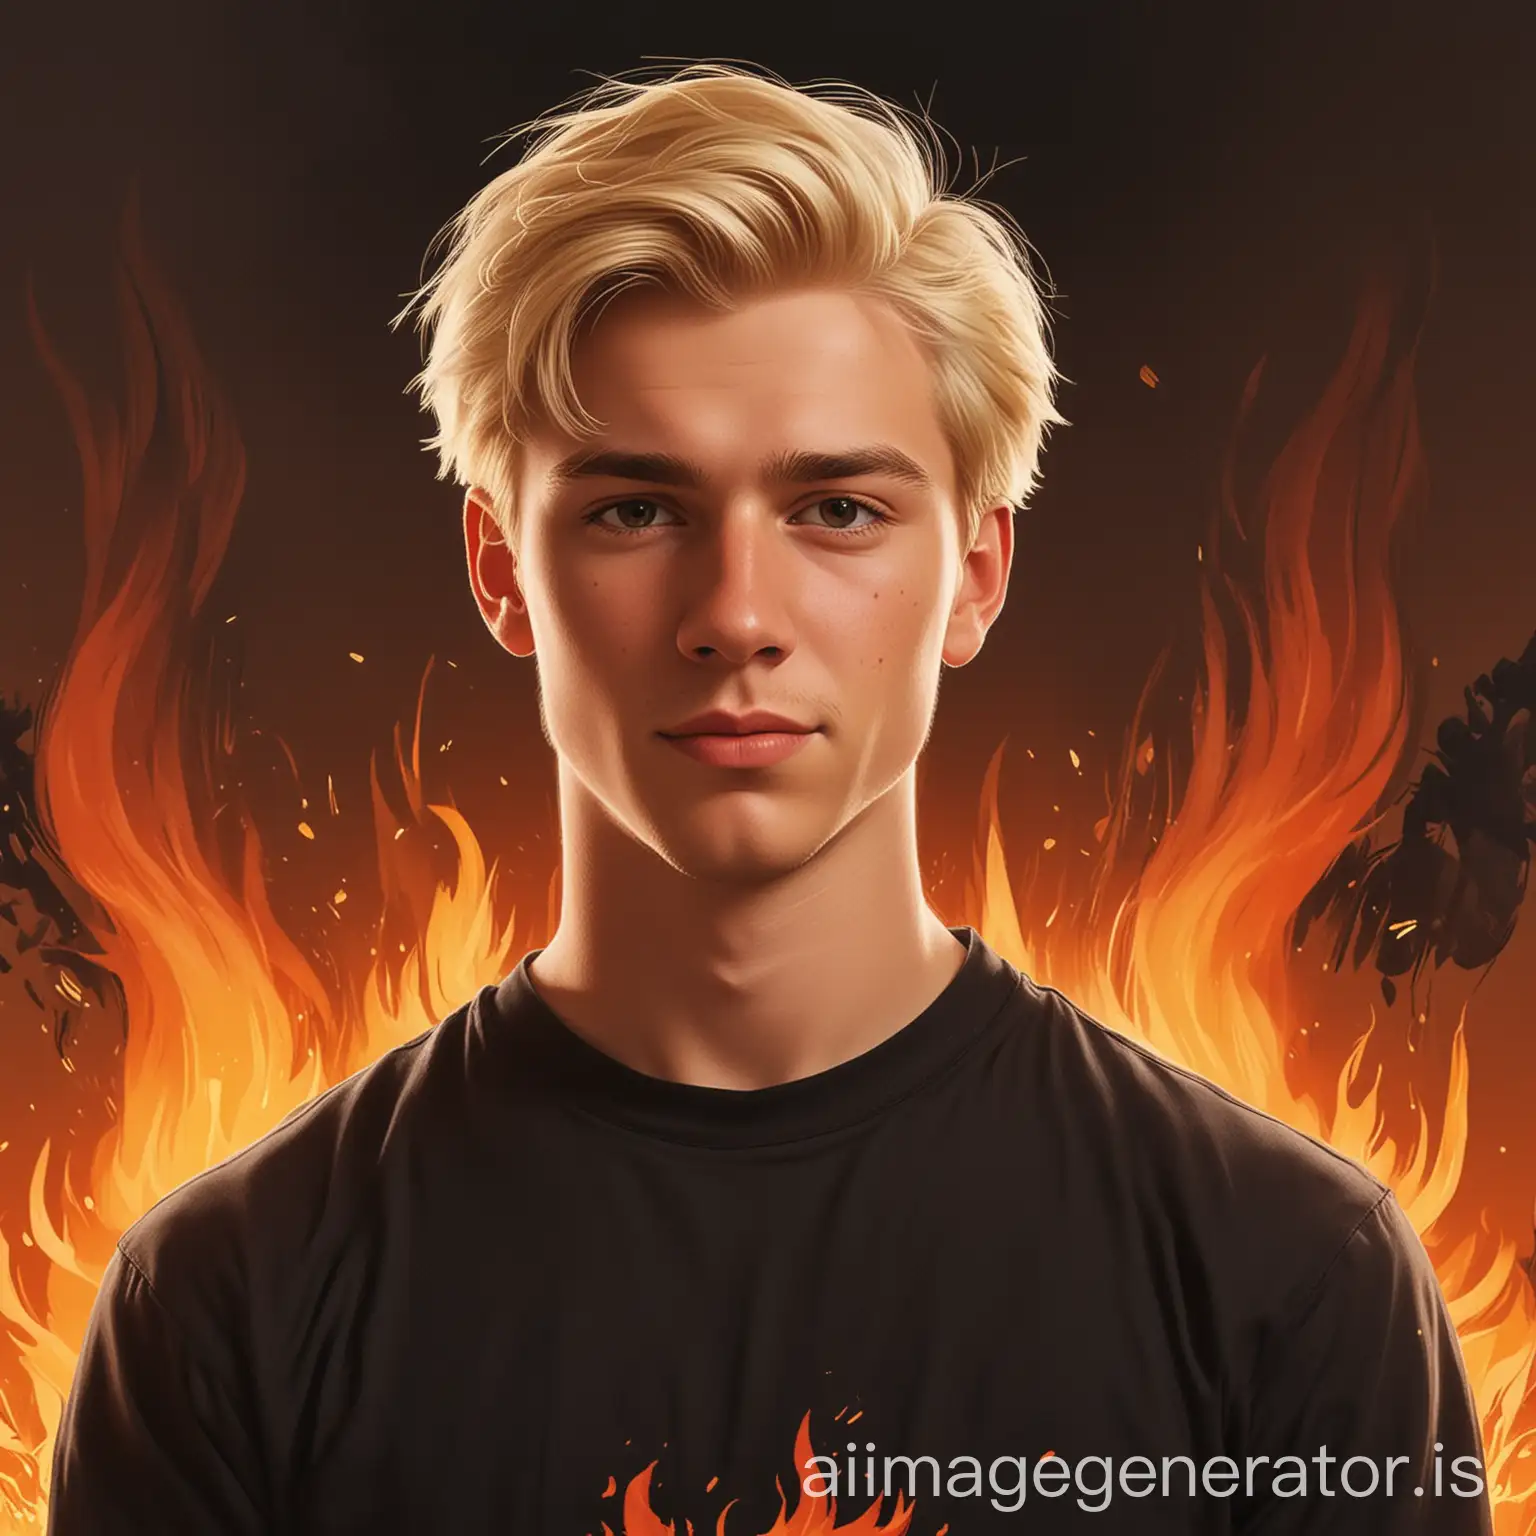 Blond-Man-in-Black-Shirt-Surrounded-by-Fiery-Nature